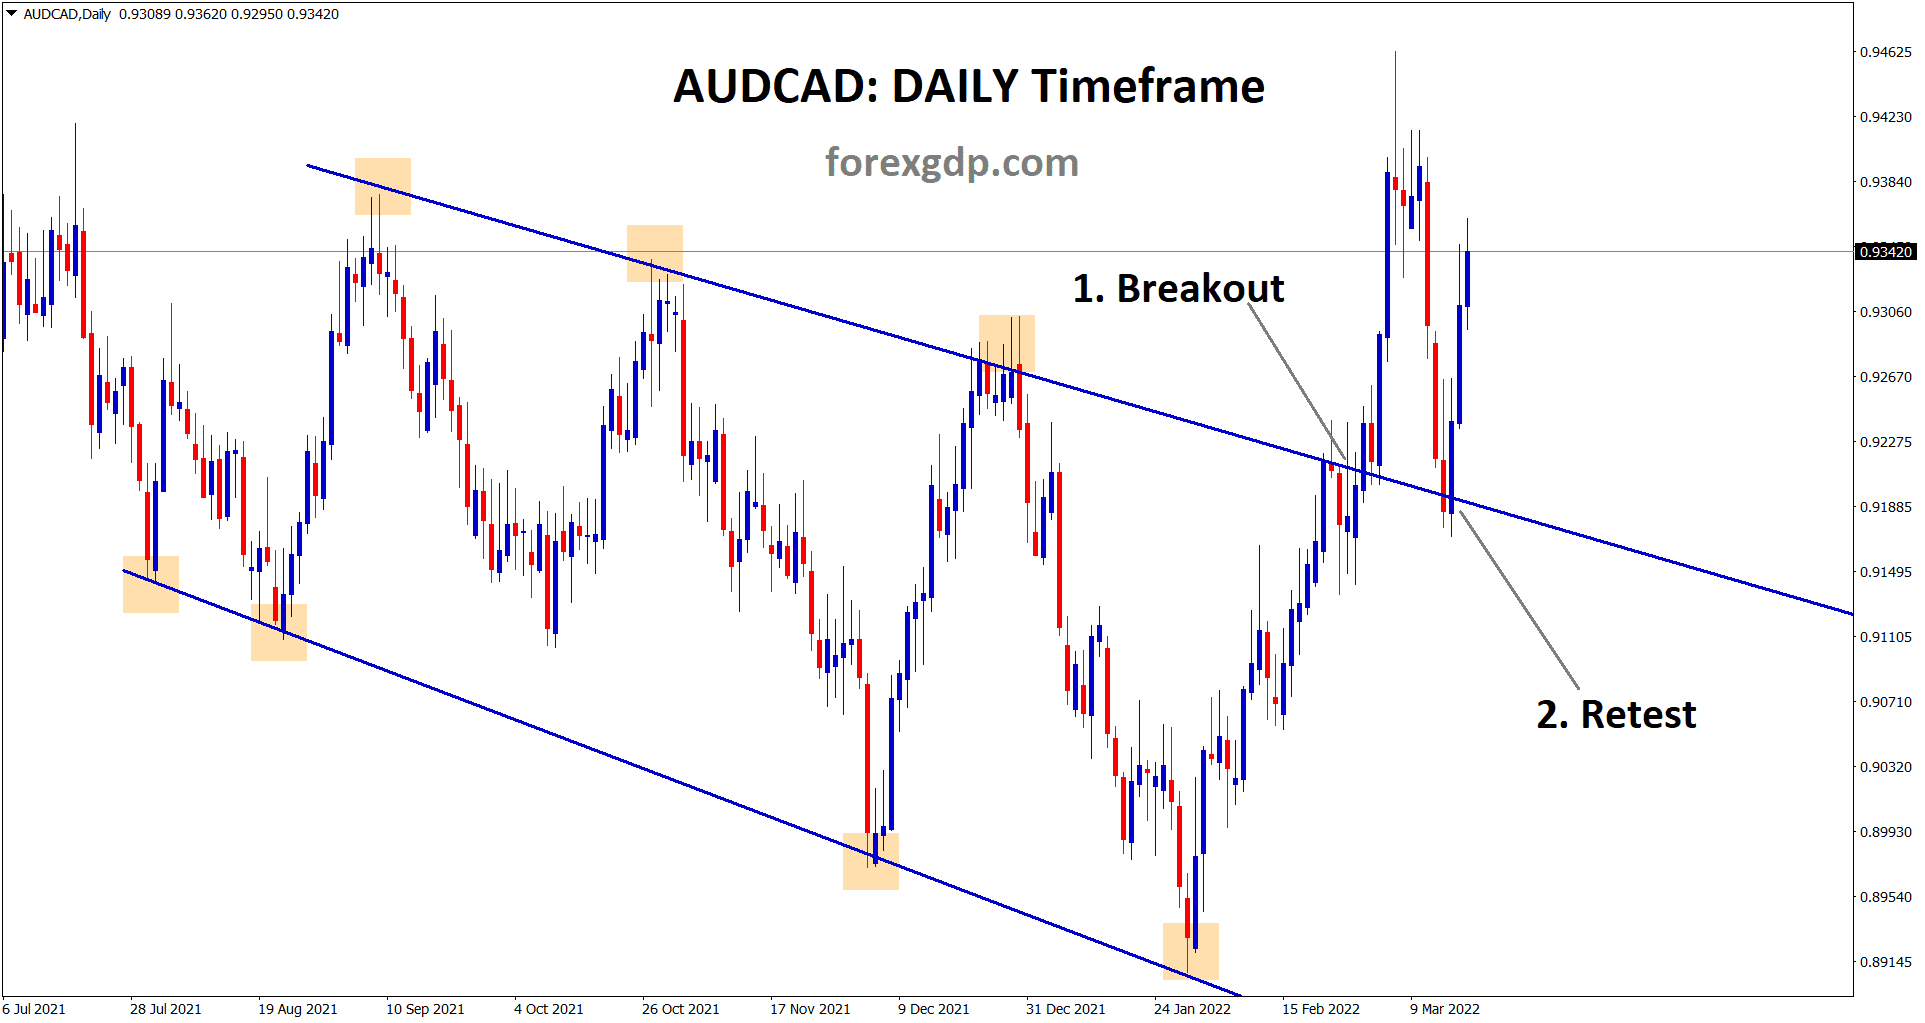 AUDCAD is rebounding clearly from the retest area